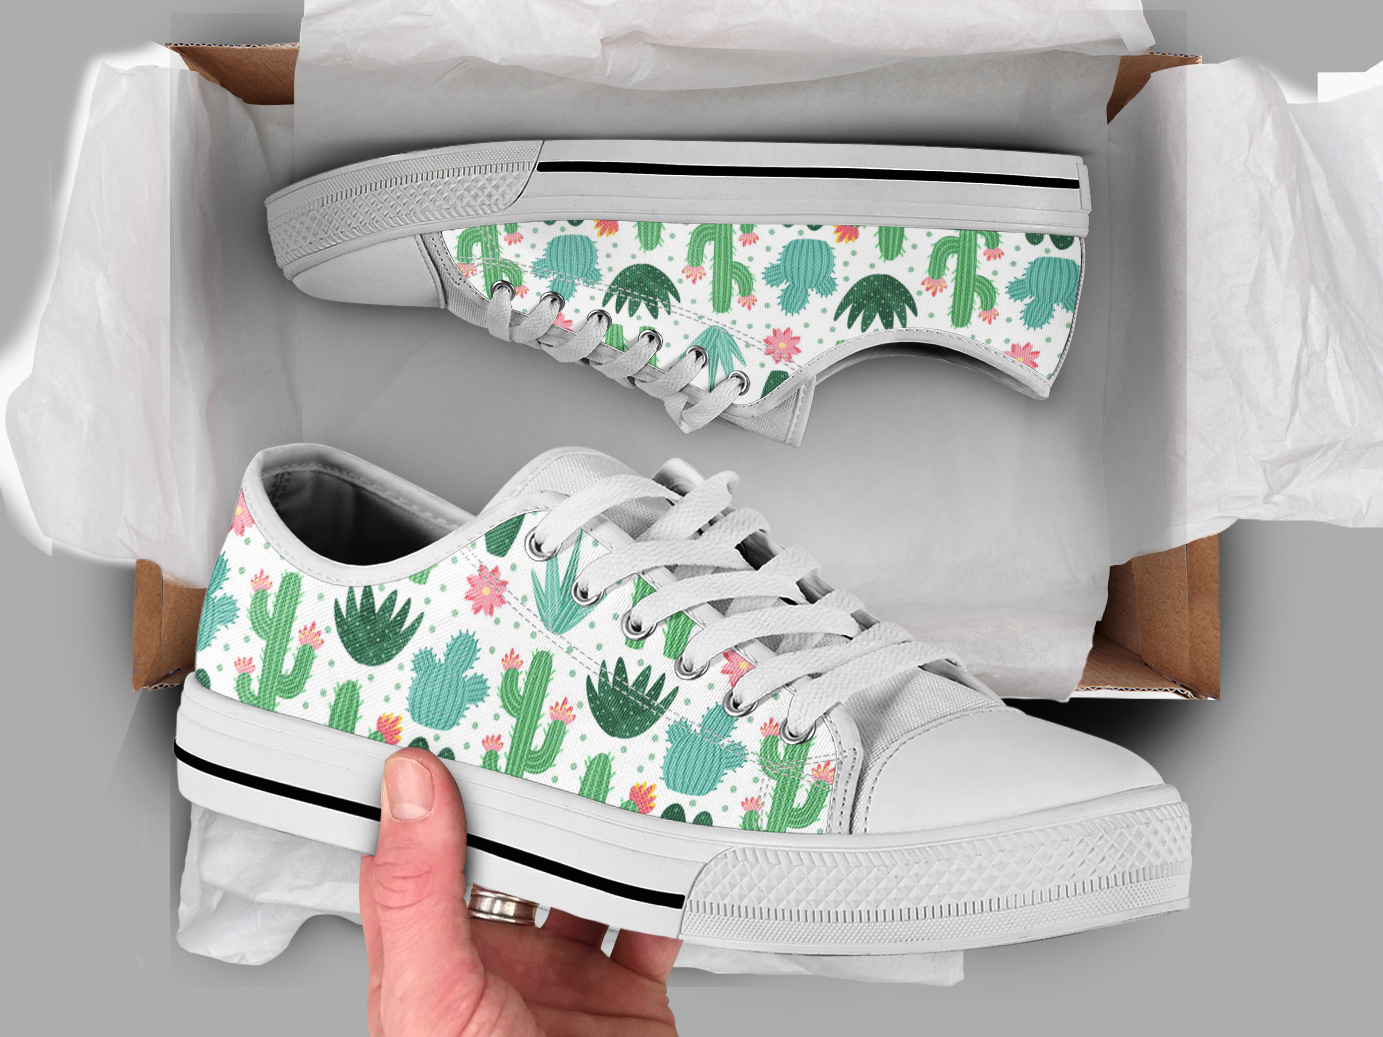 White Green Cactus Shoes | Custom Low Tops Sneakers For Kids & Adults